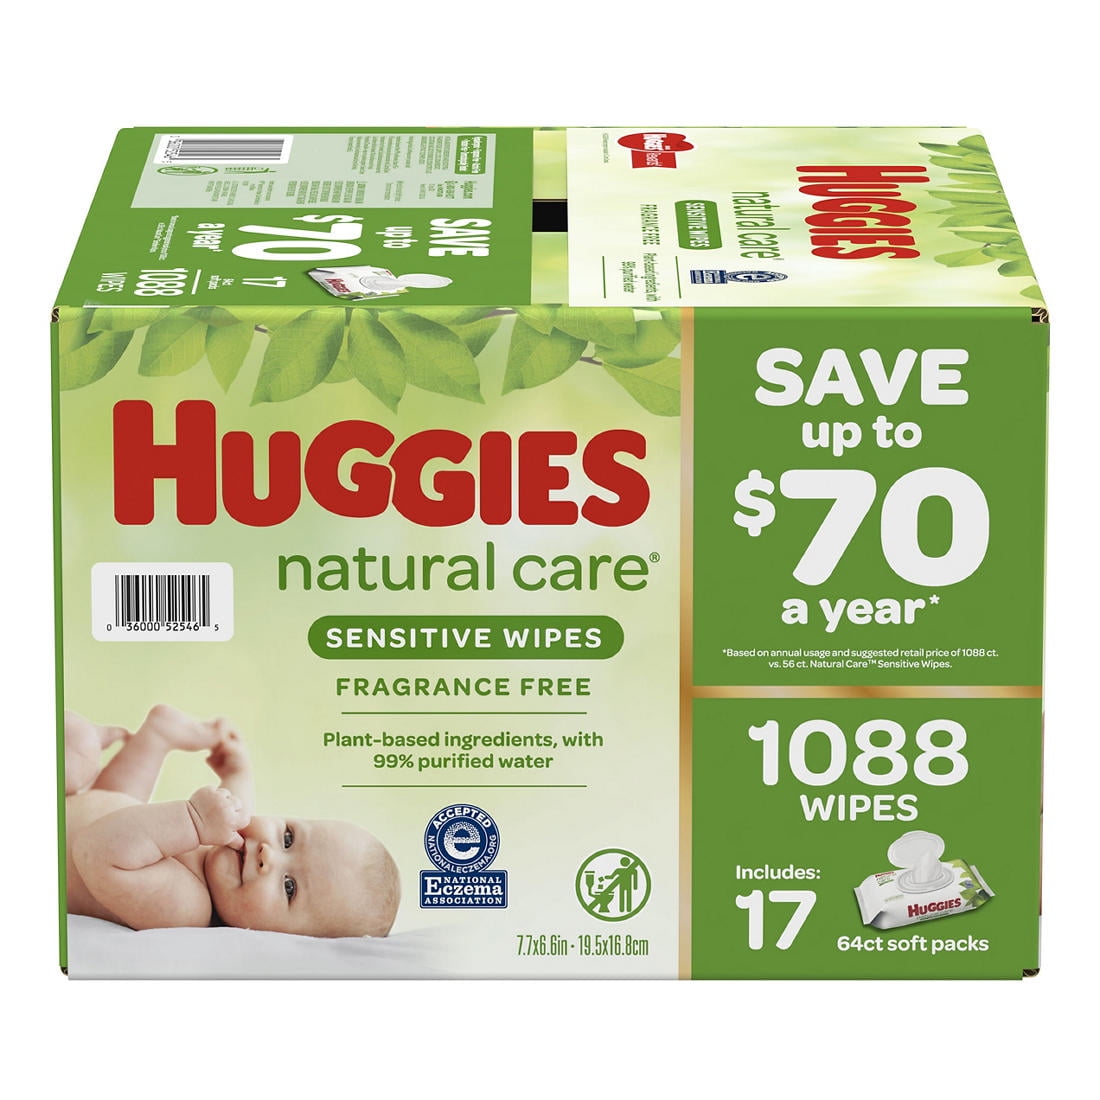 Huggies® Diapers Coupons & Baby Wipes Coupons